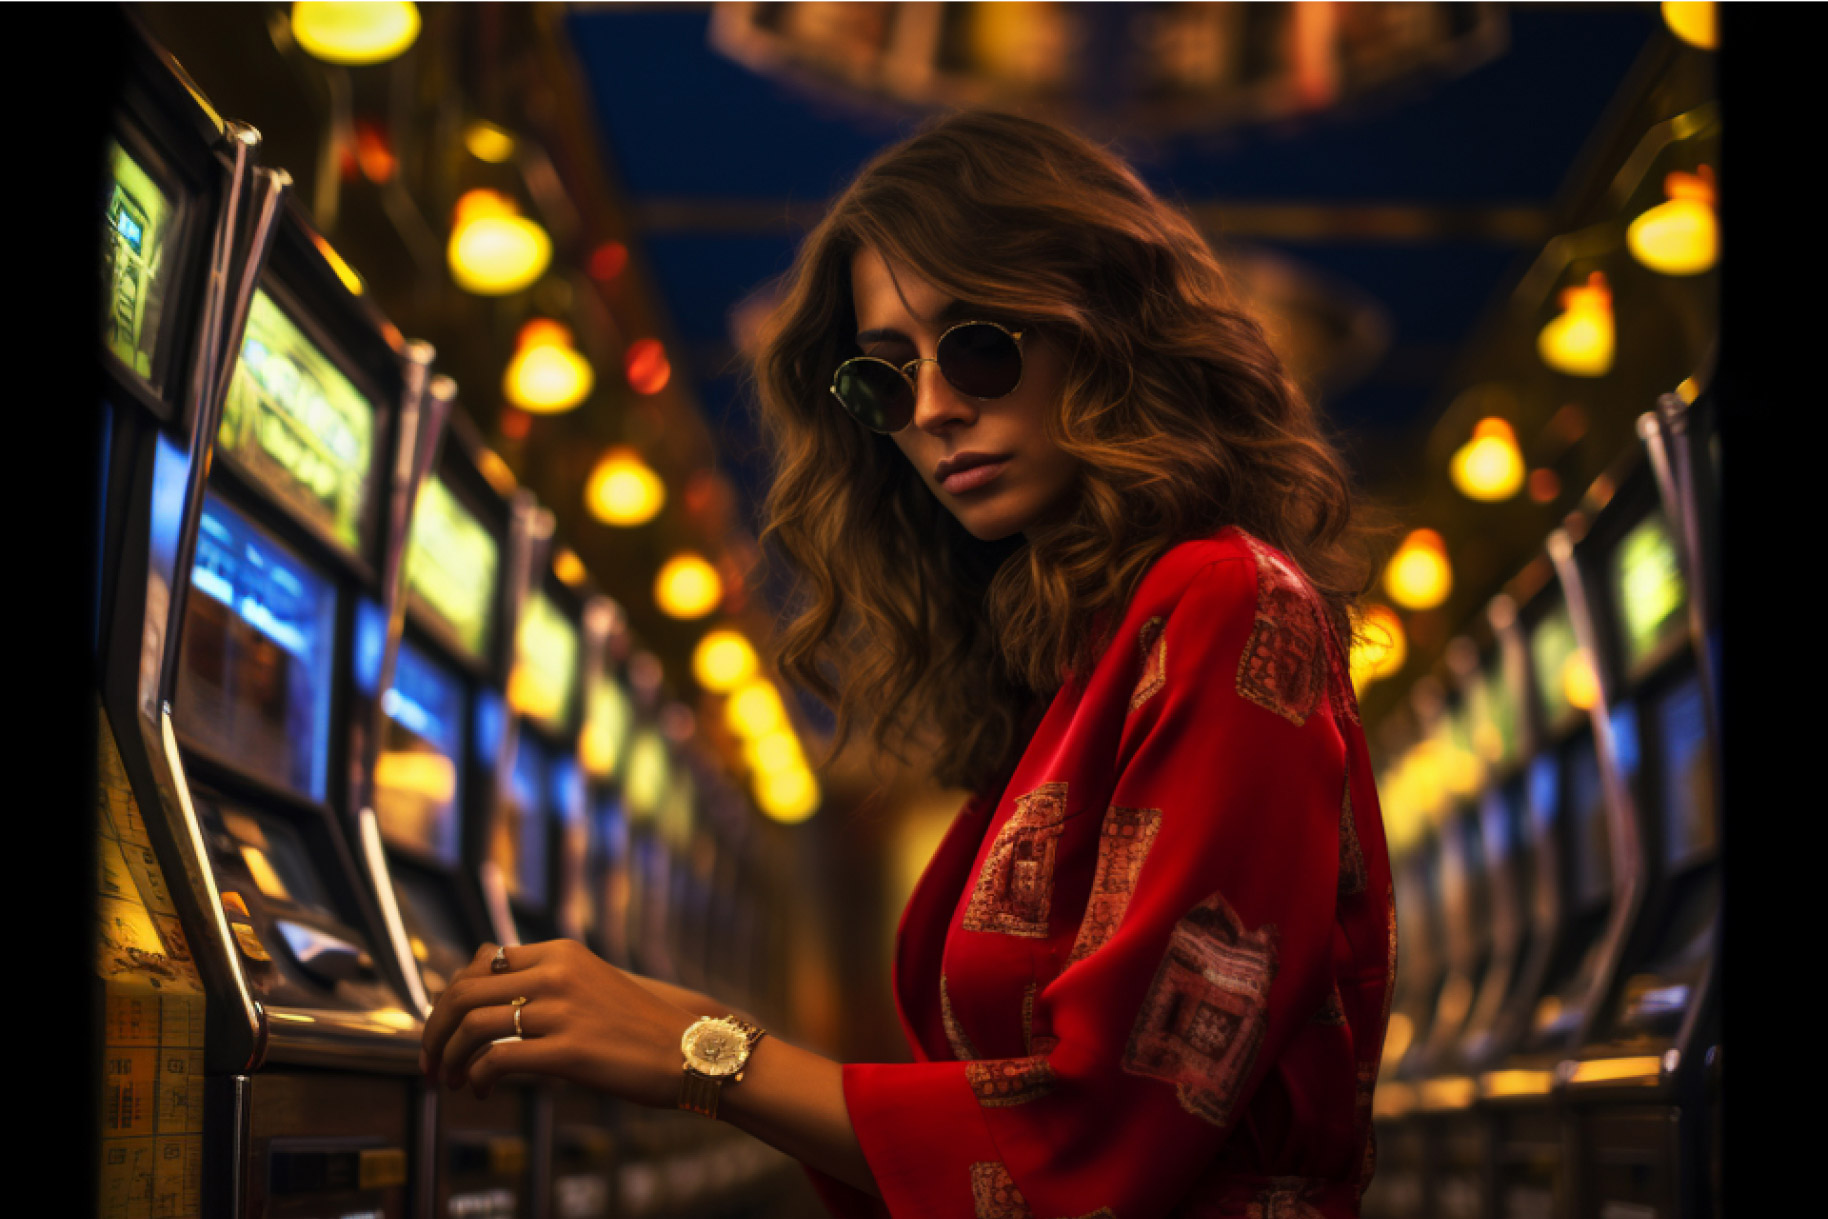 Woman with sunglasses in front of slot machines